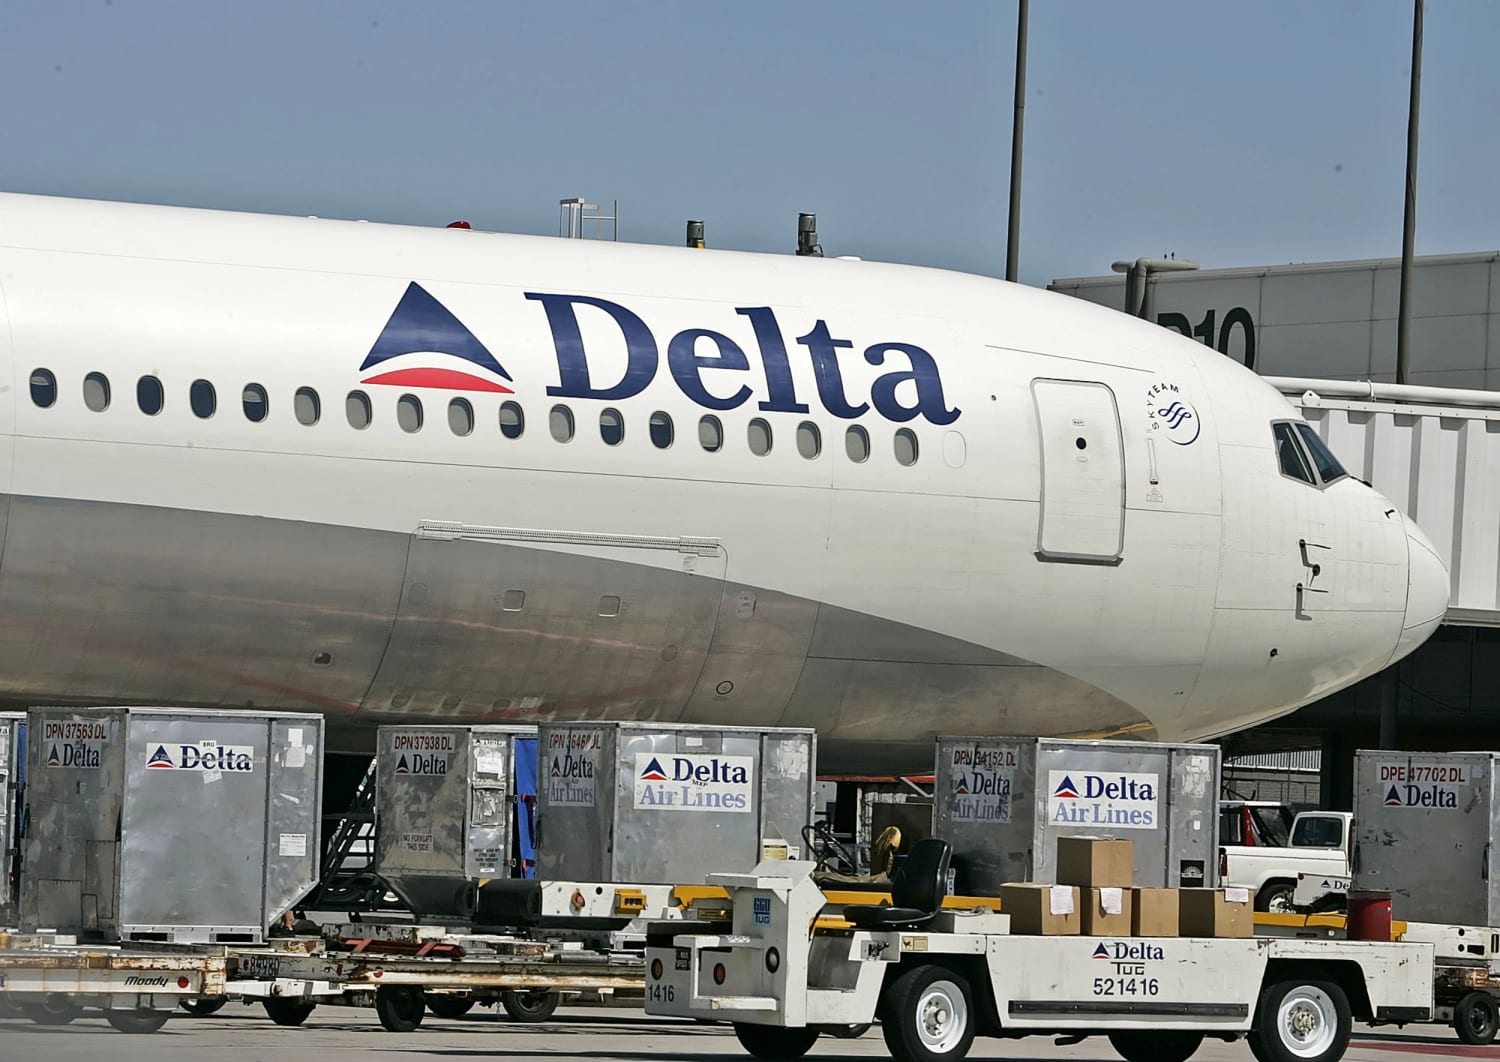 This Technicality Got Family With Infant Kicked Off Overbooked Delta Flight  